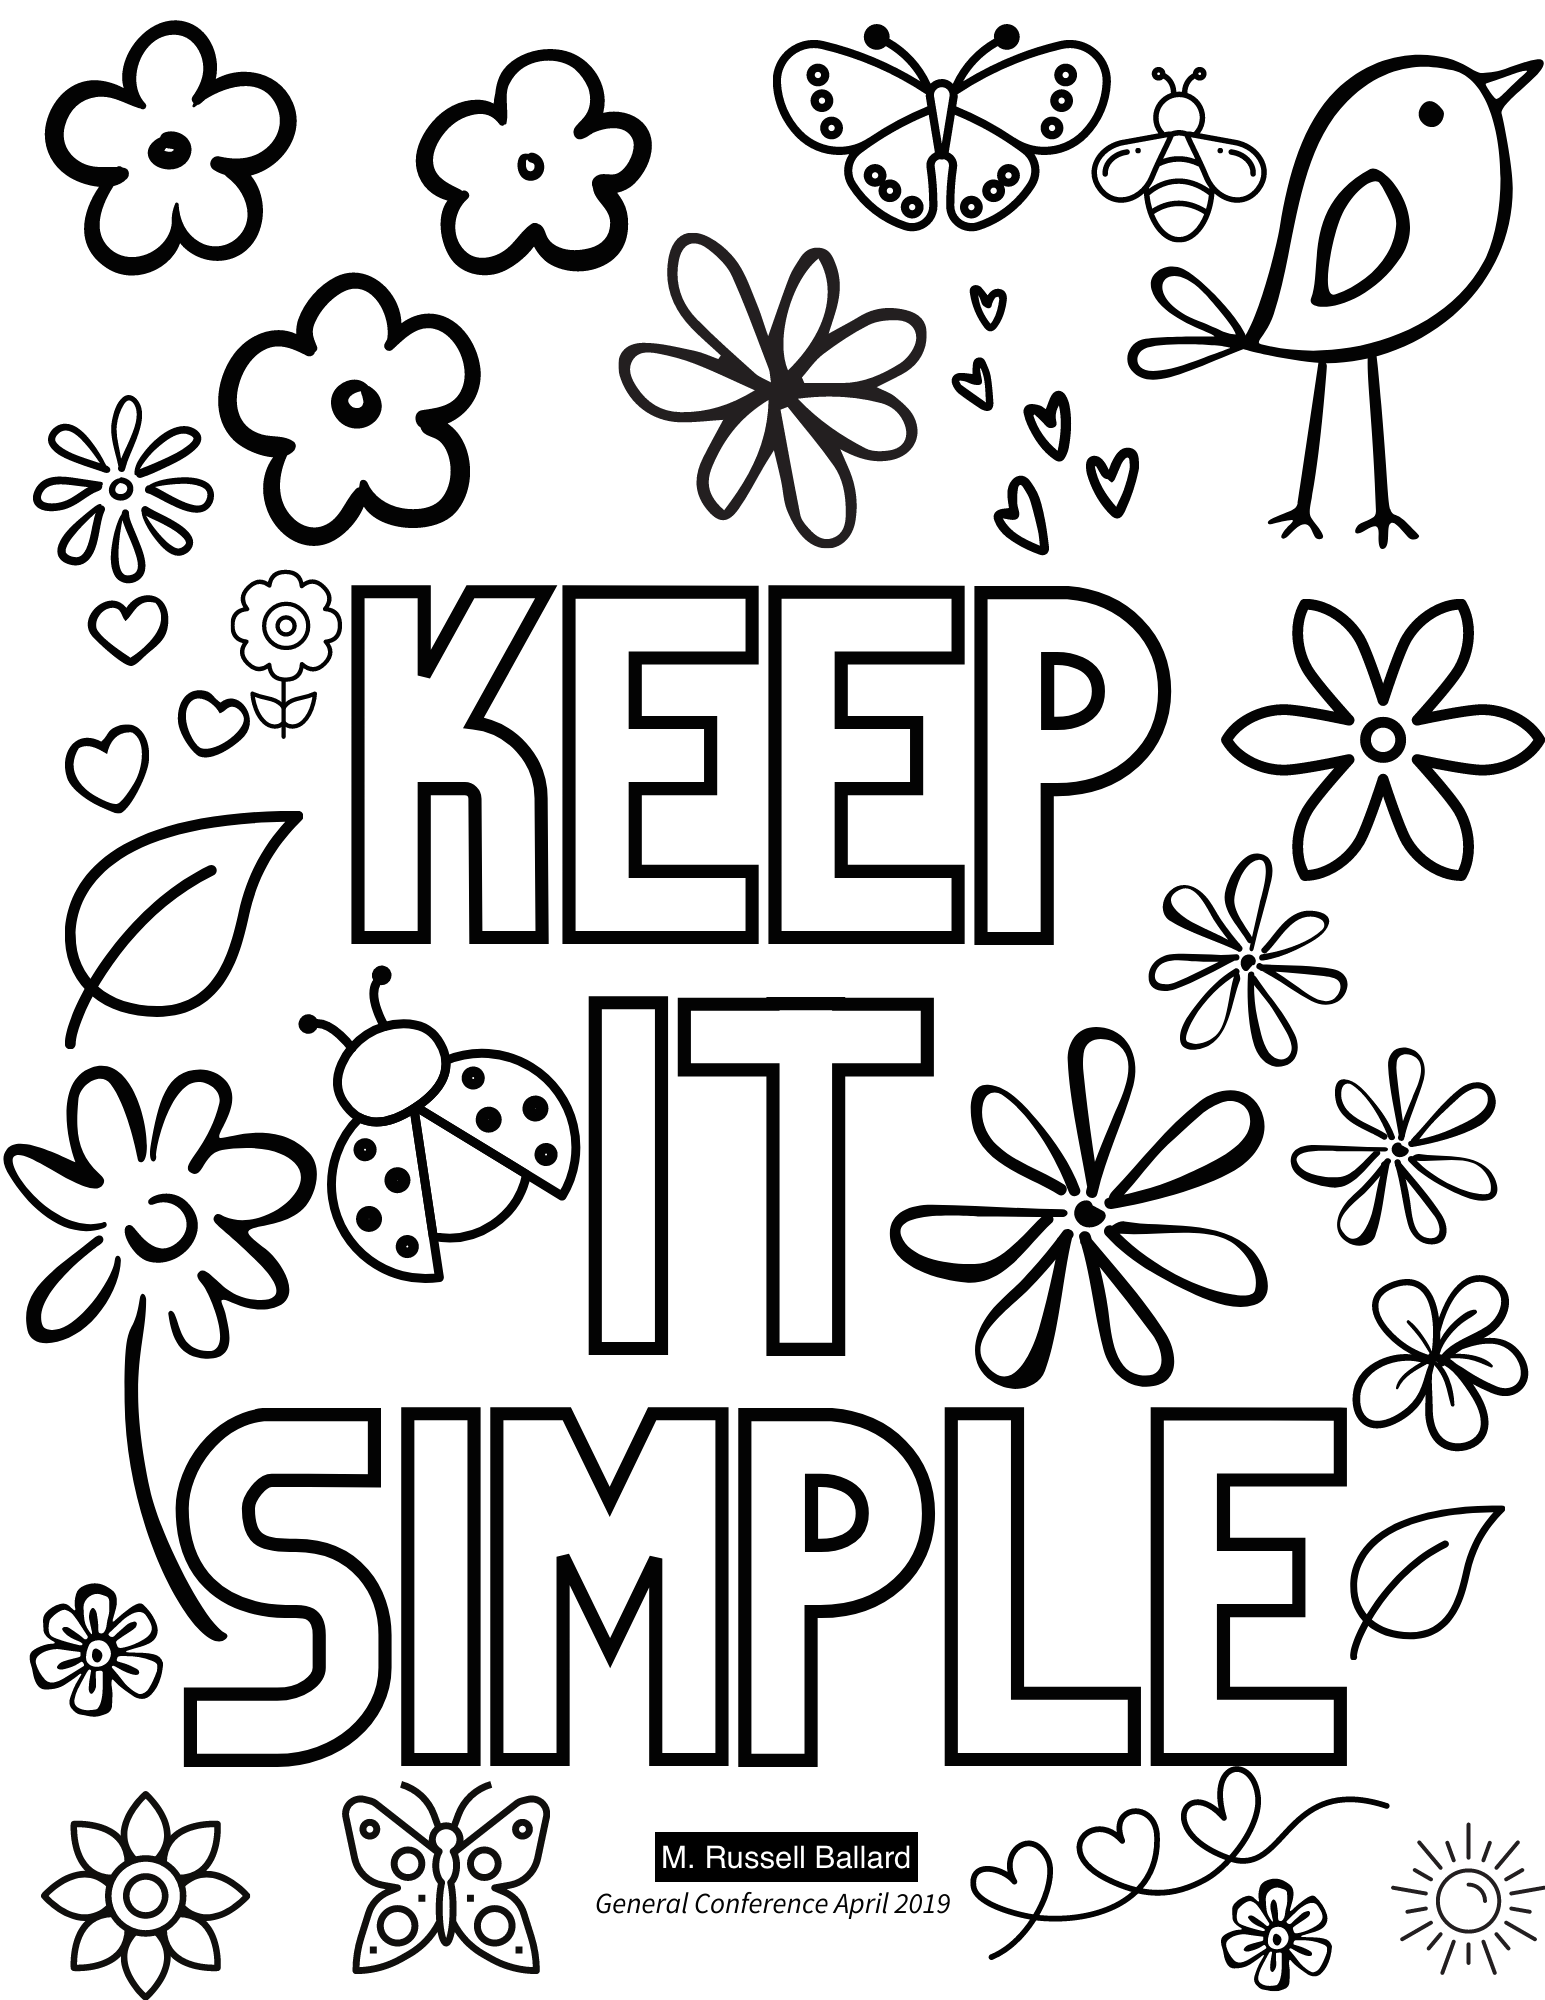 keep it simple m russell ballard general conference quote, general conference coloring sheets, general conference quotes